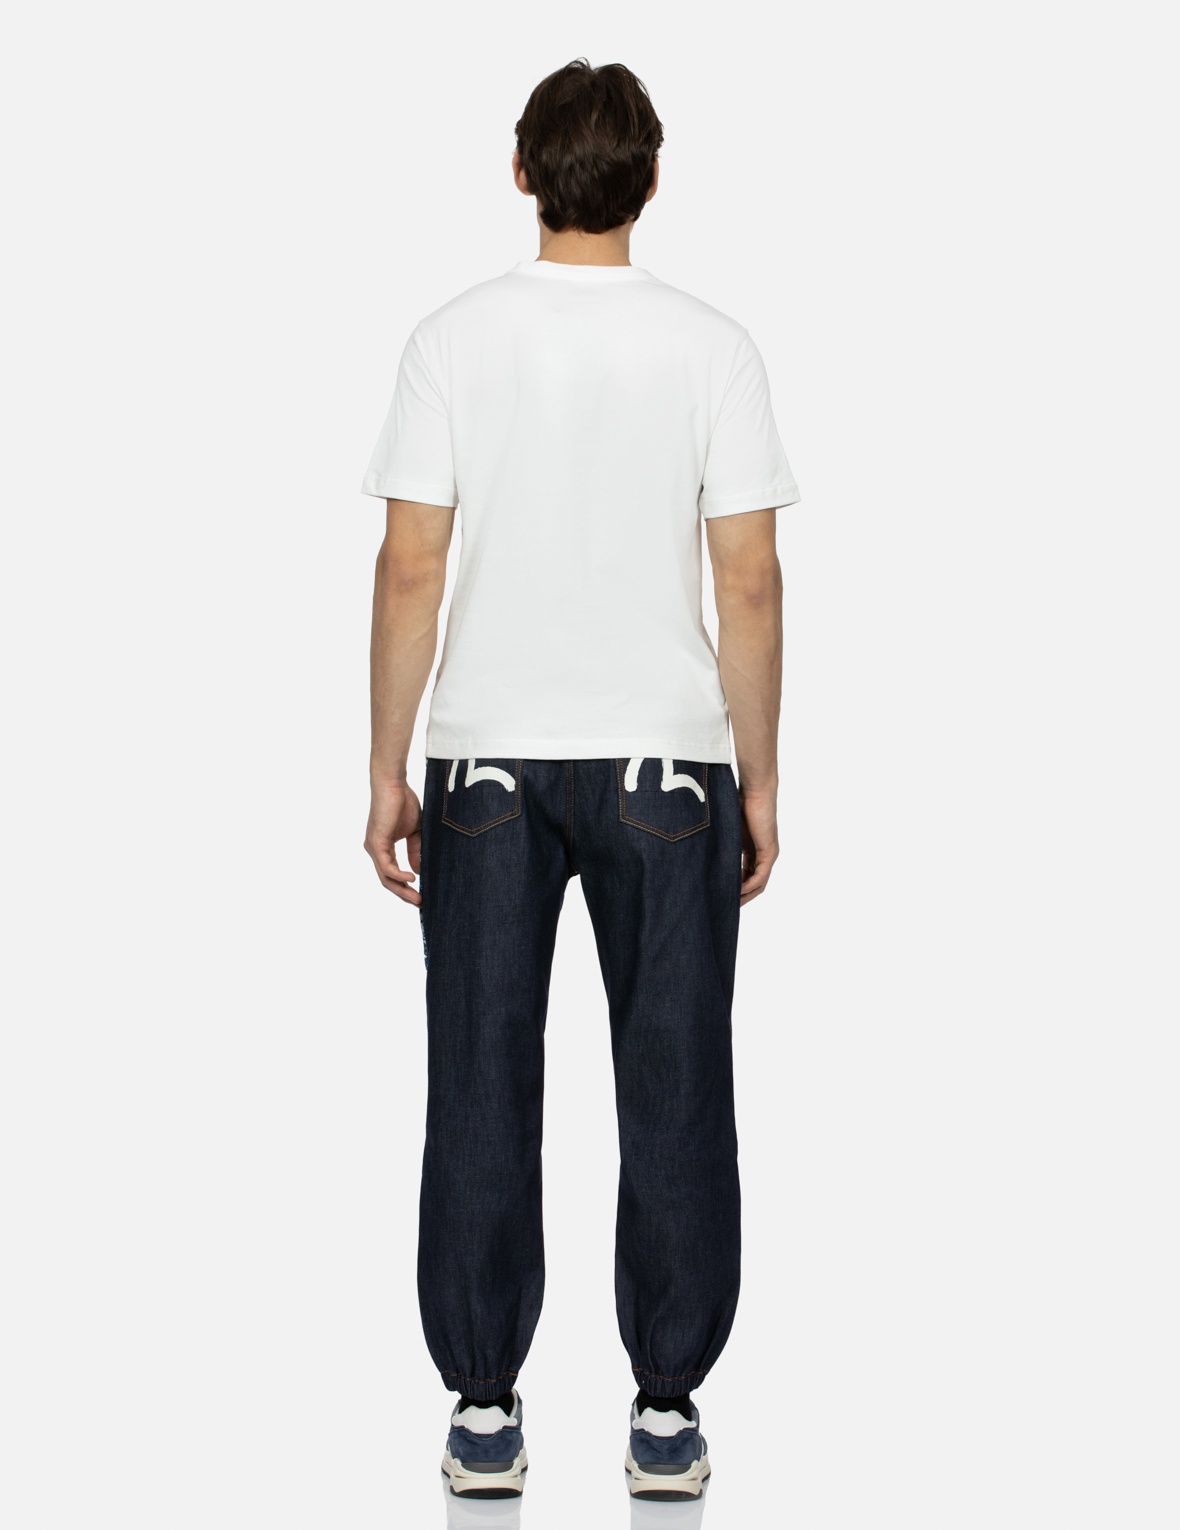 SEAGULL PRINT WITH DENIM CHAIN RELAX FIT DENIM JOGGERS - 5